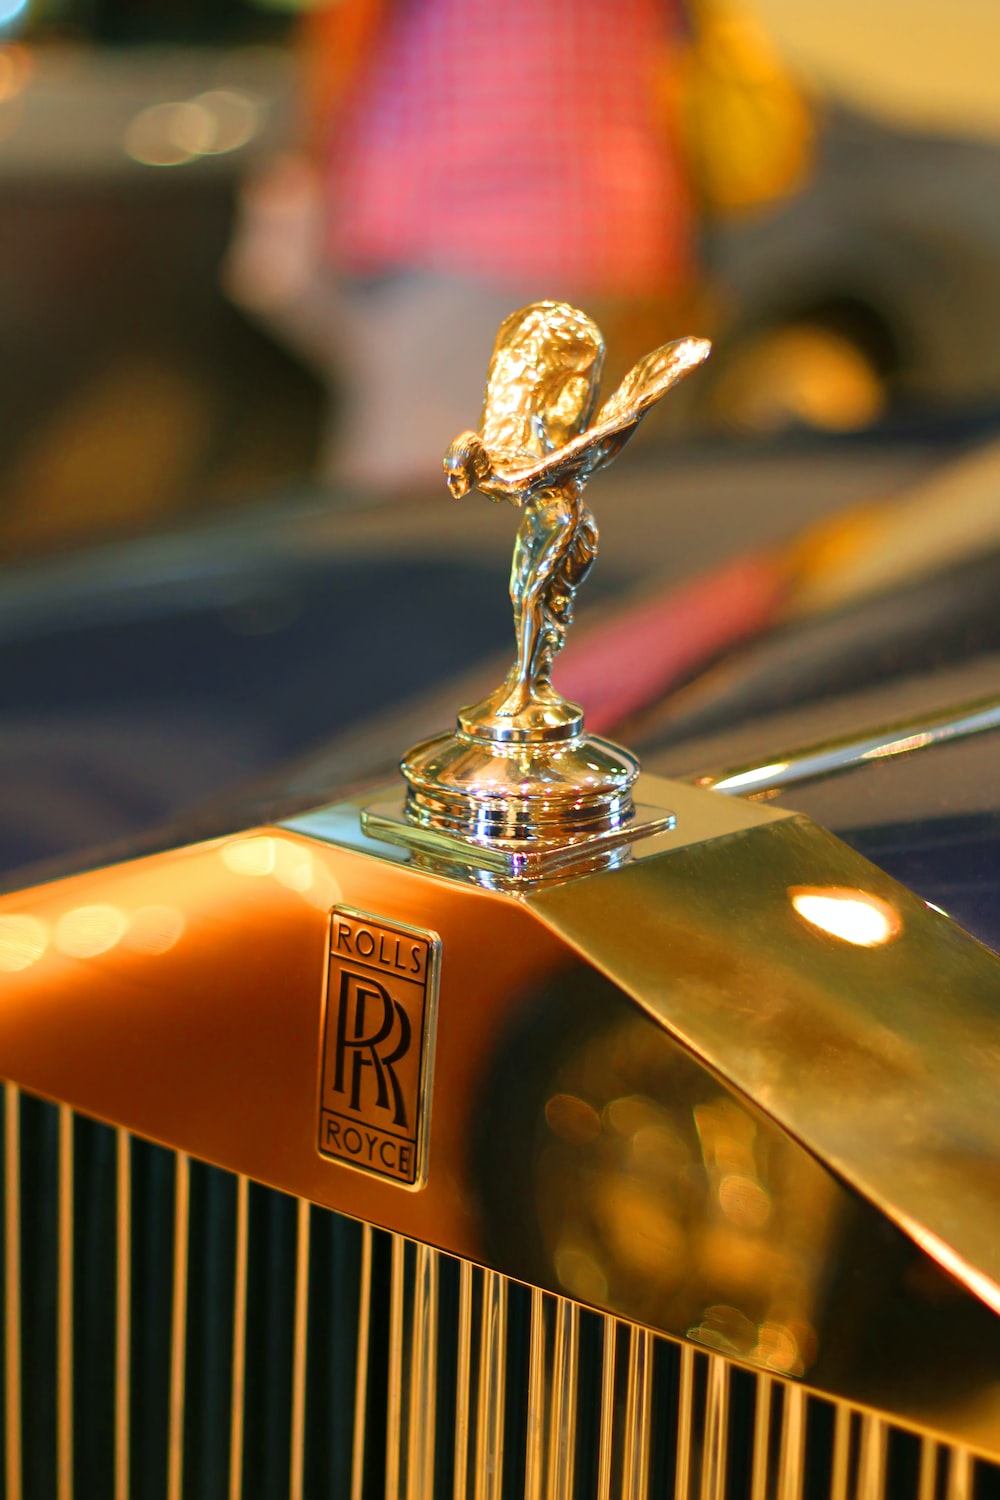 Rolls royce pictures download free images on